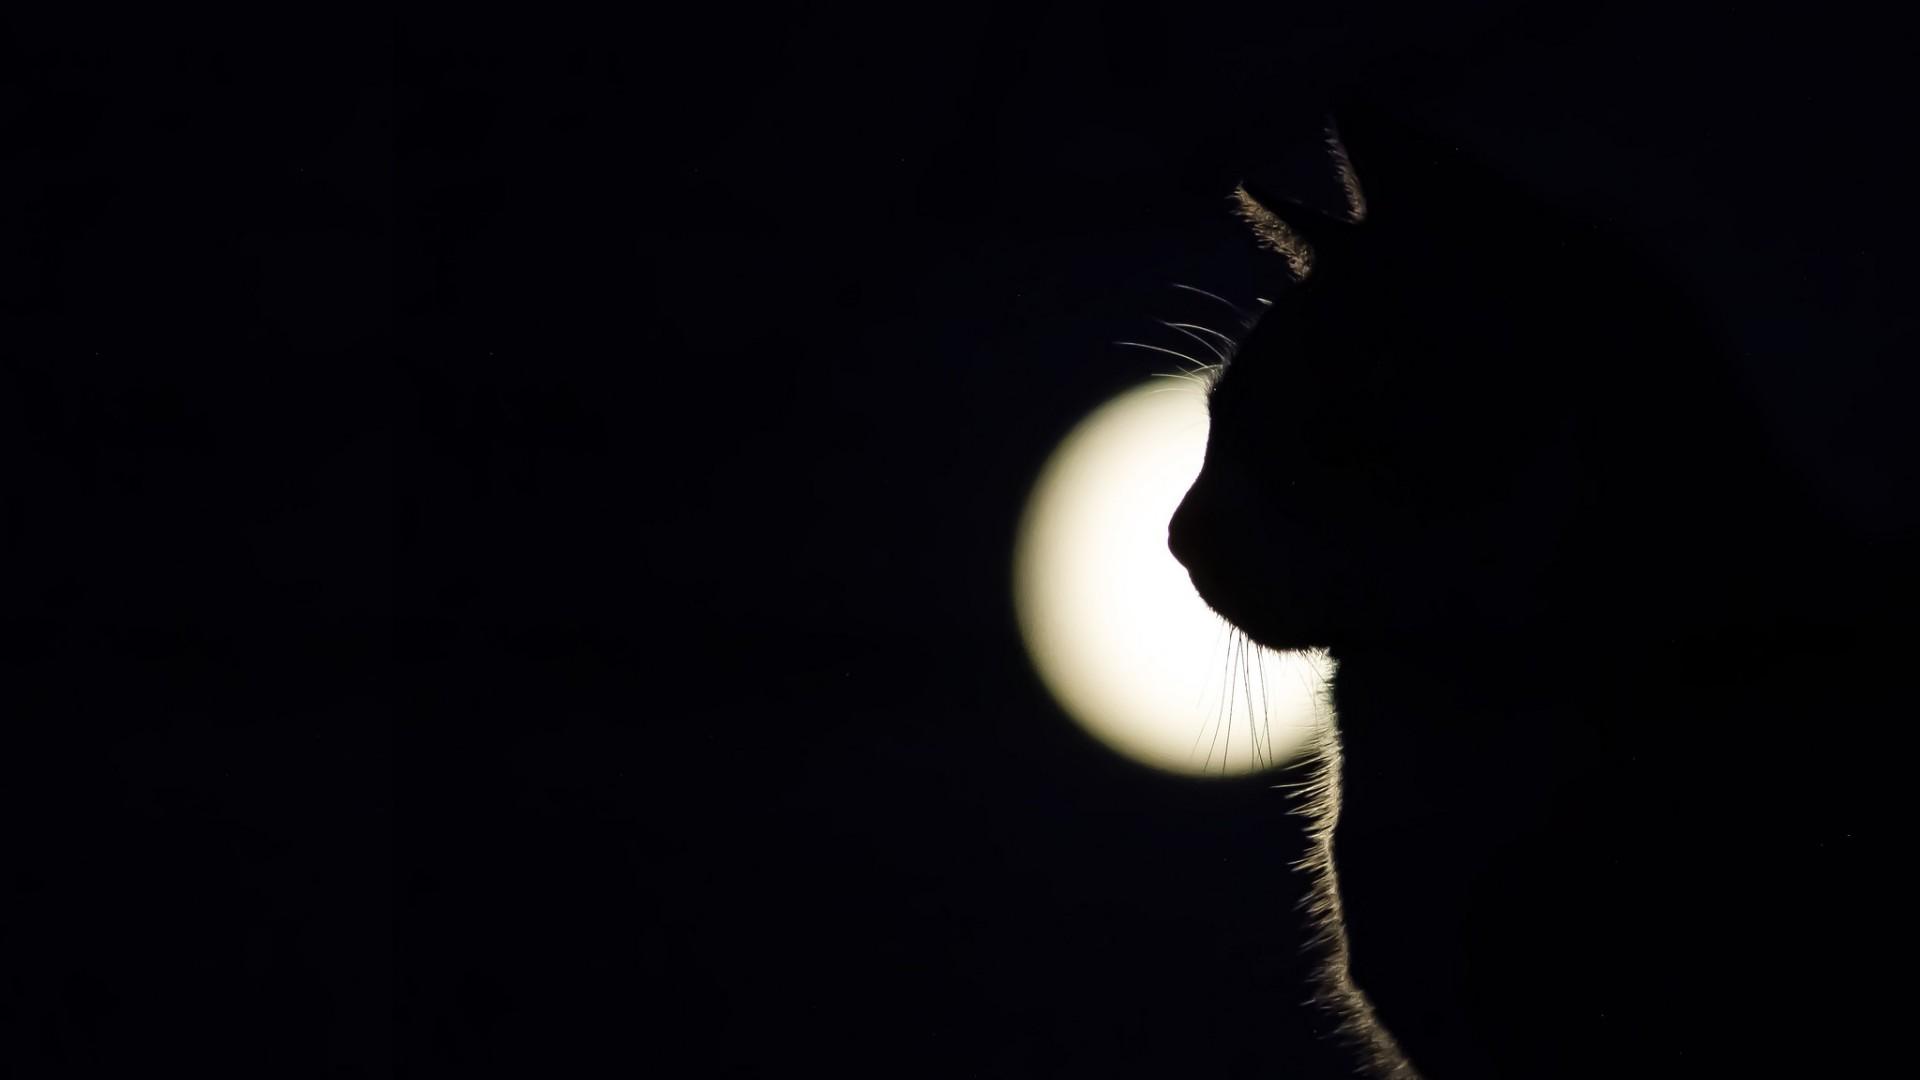 Cat in the full moon - backiee